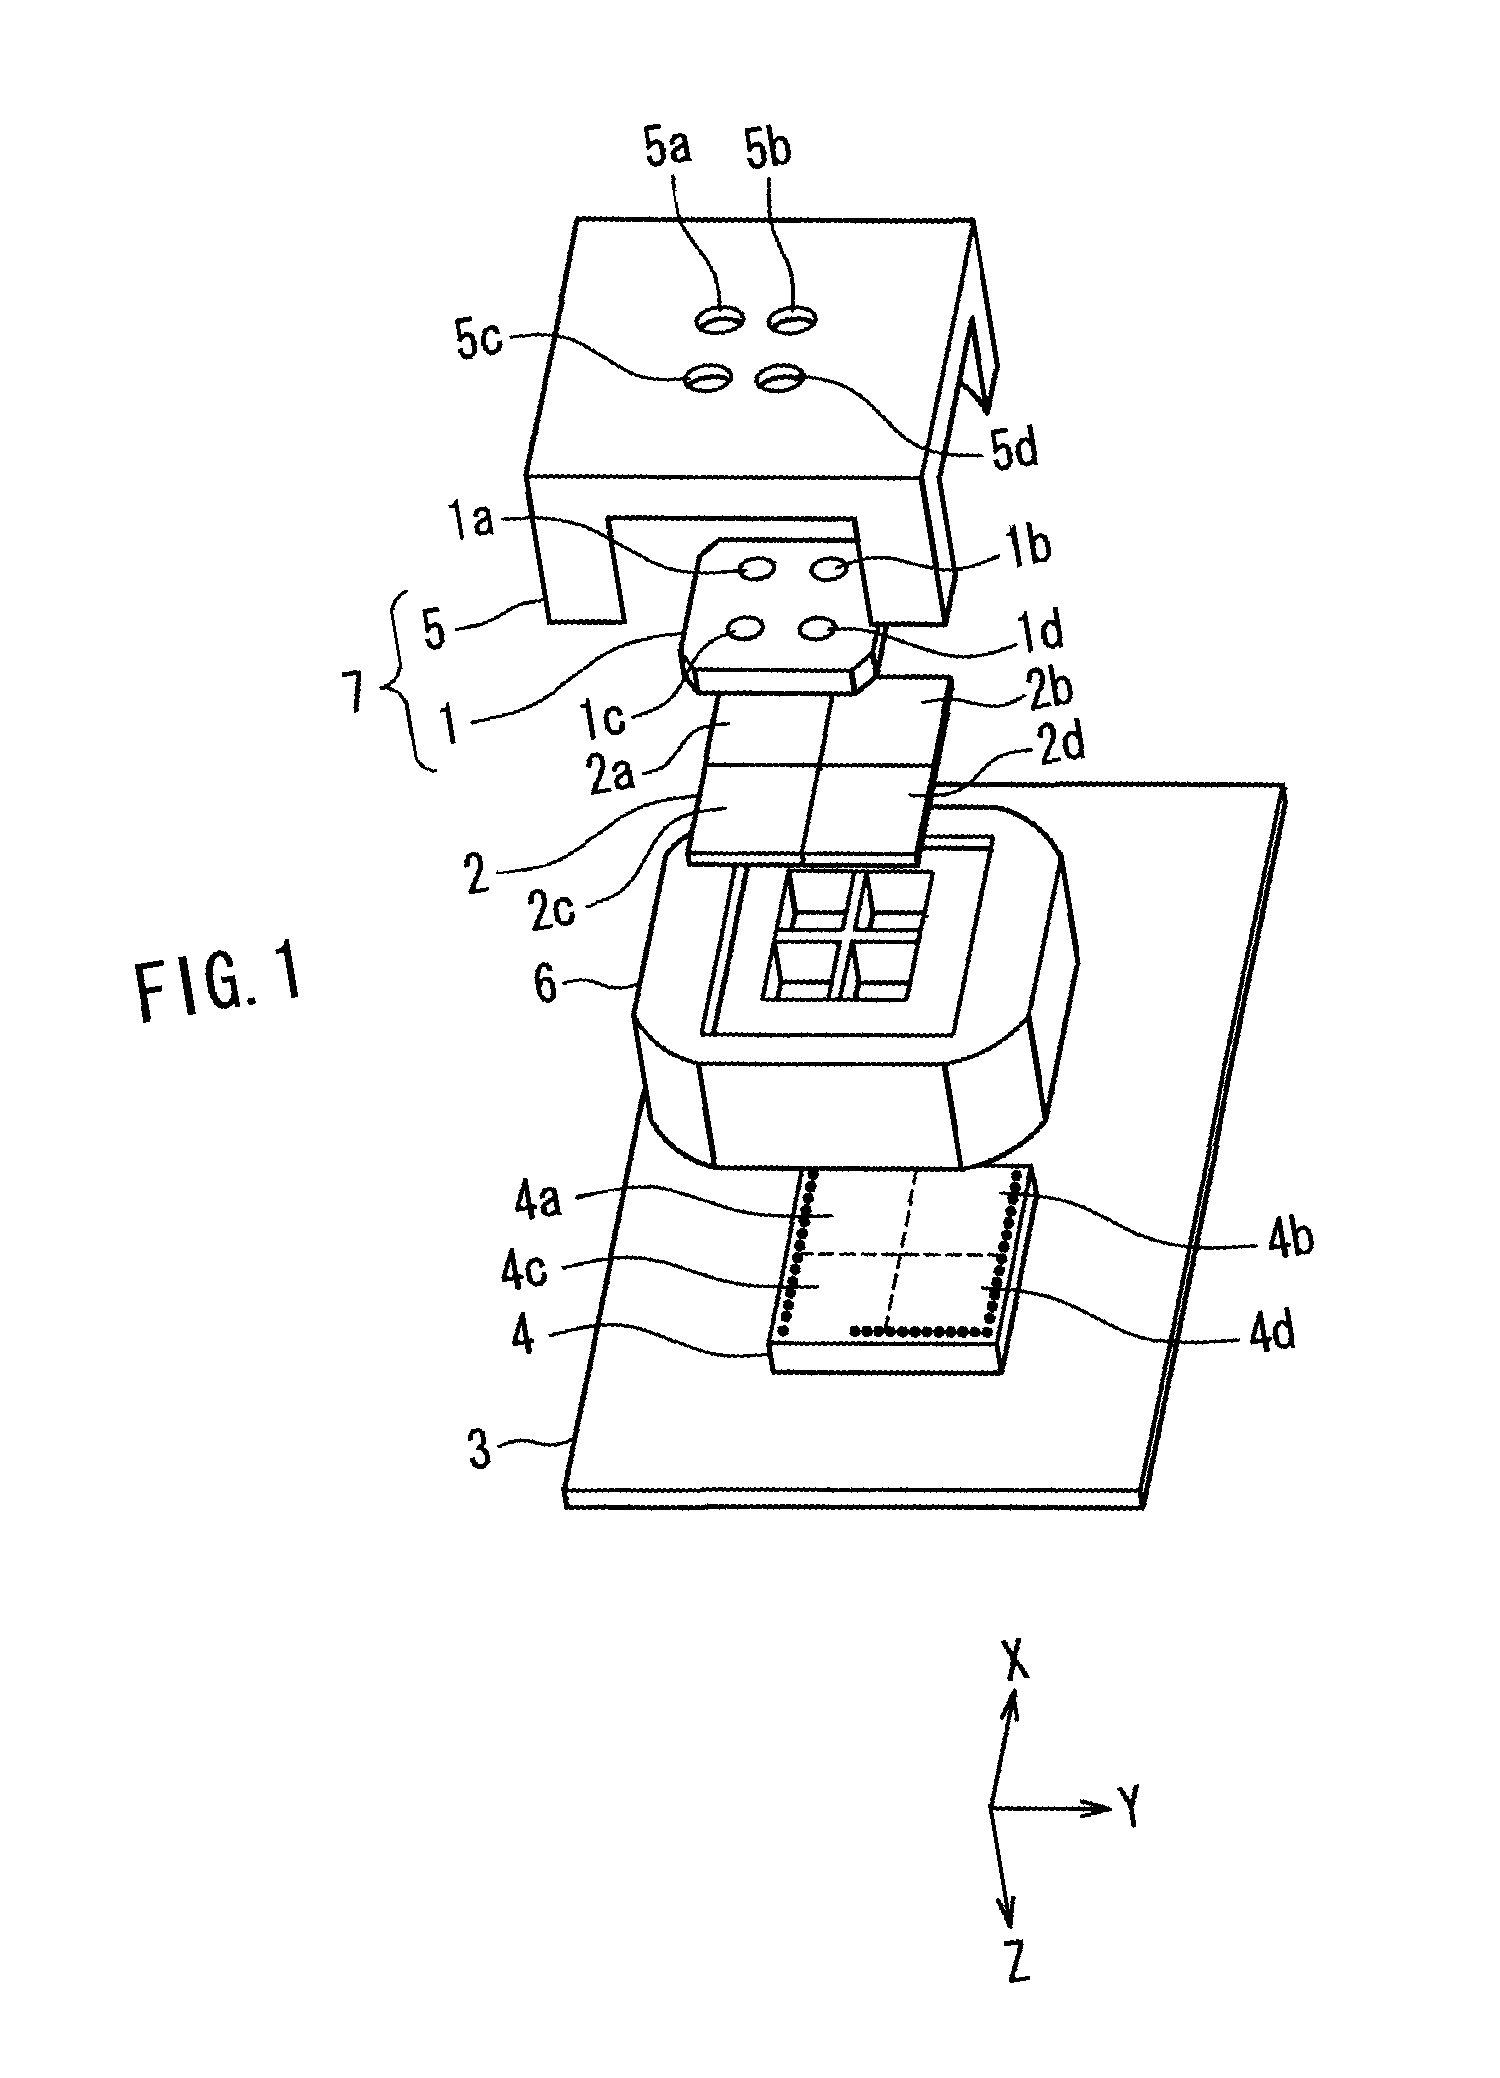 Compound eye camera module and method of producing the same